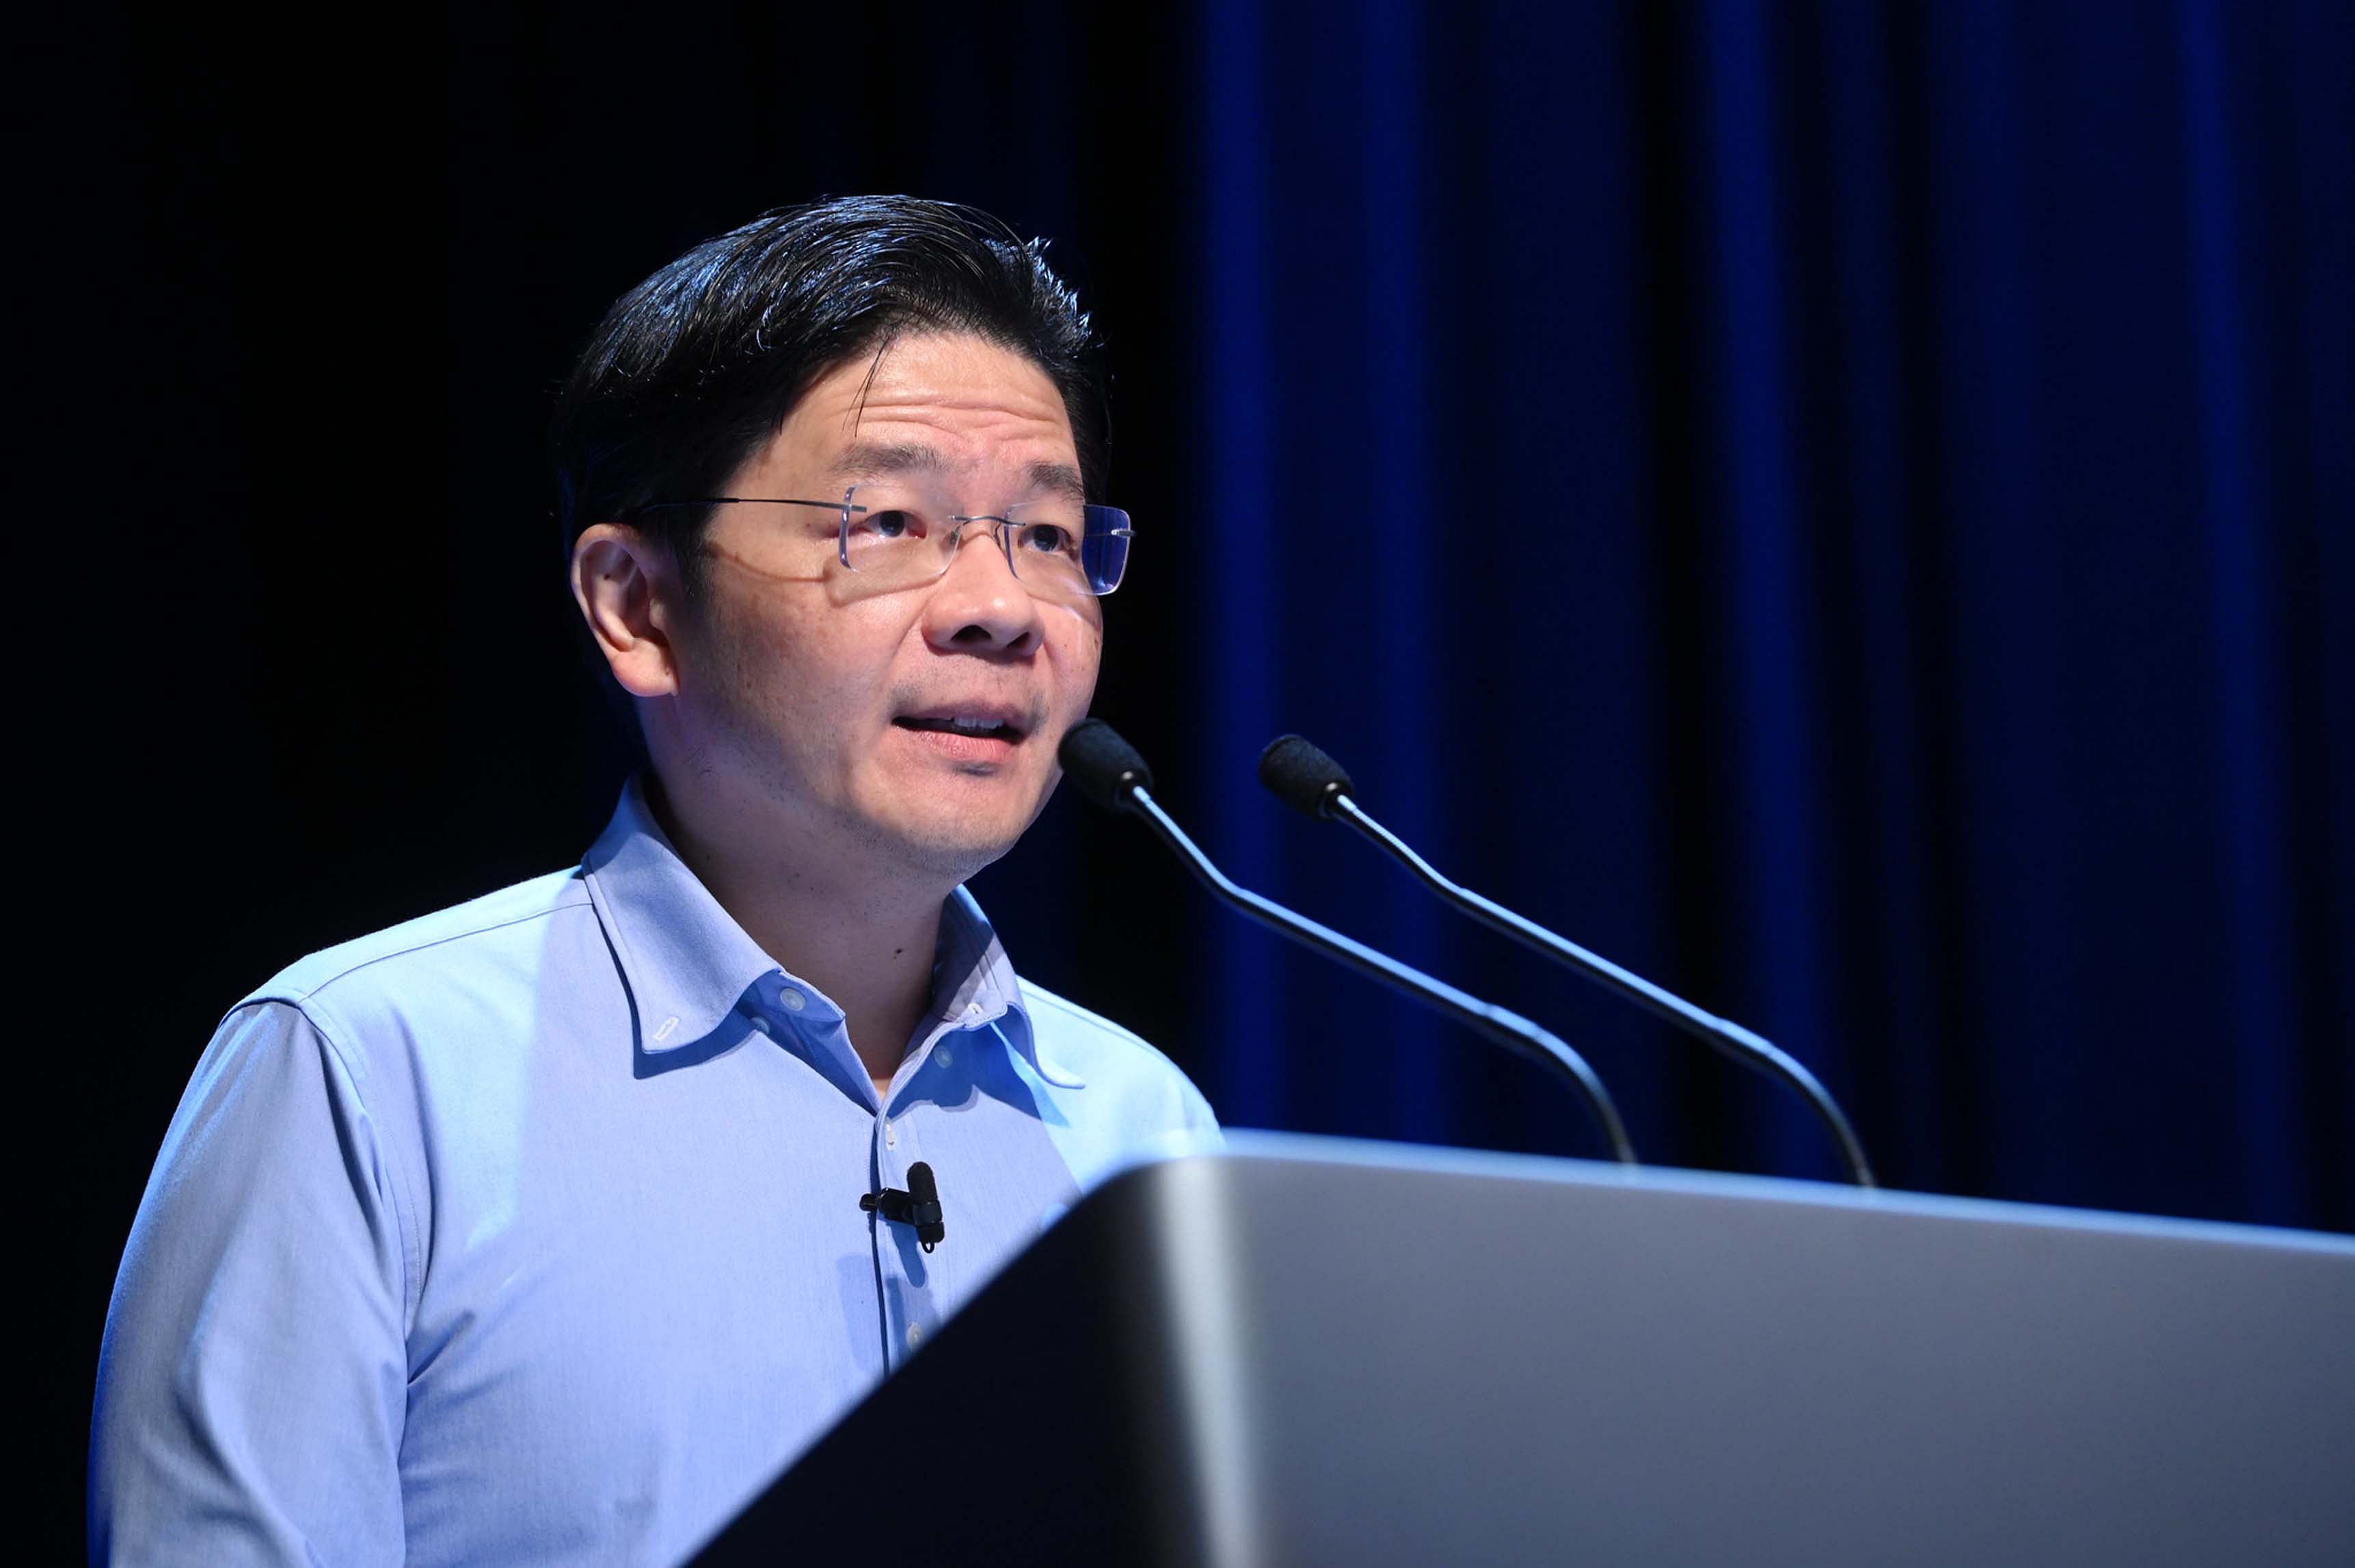 Finance Minister Lawrence Wong To Deliver Ministerial Statement On Covid 19 Support Measures On July 5 Politics News Top Stories The Straits Times